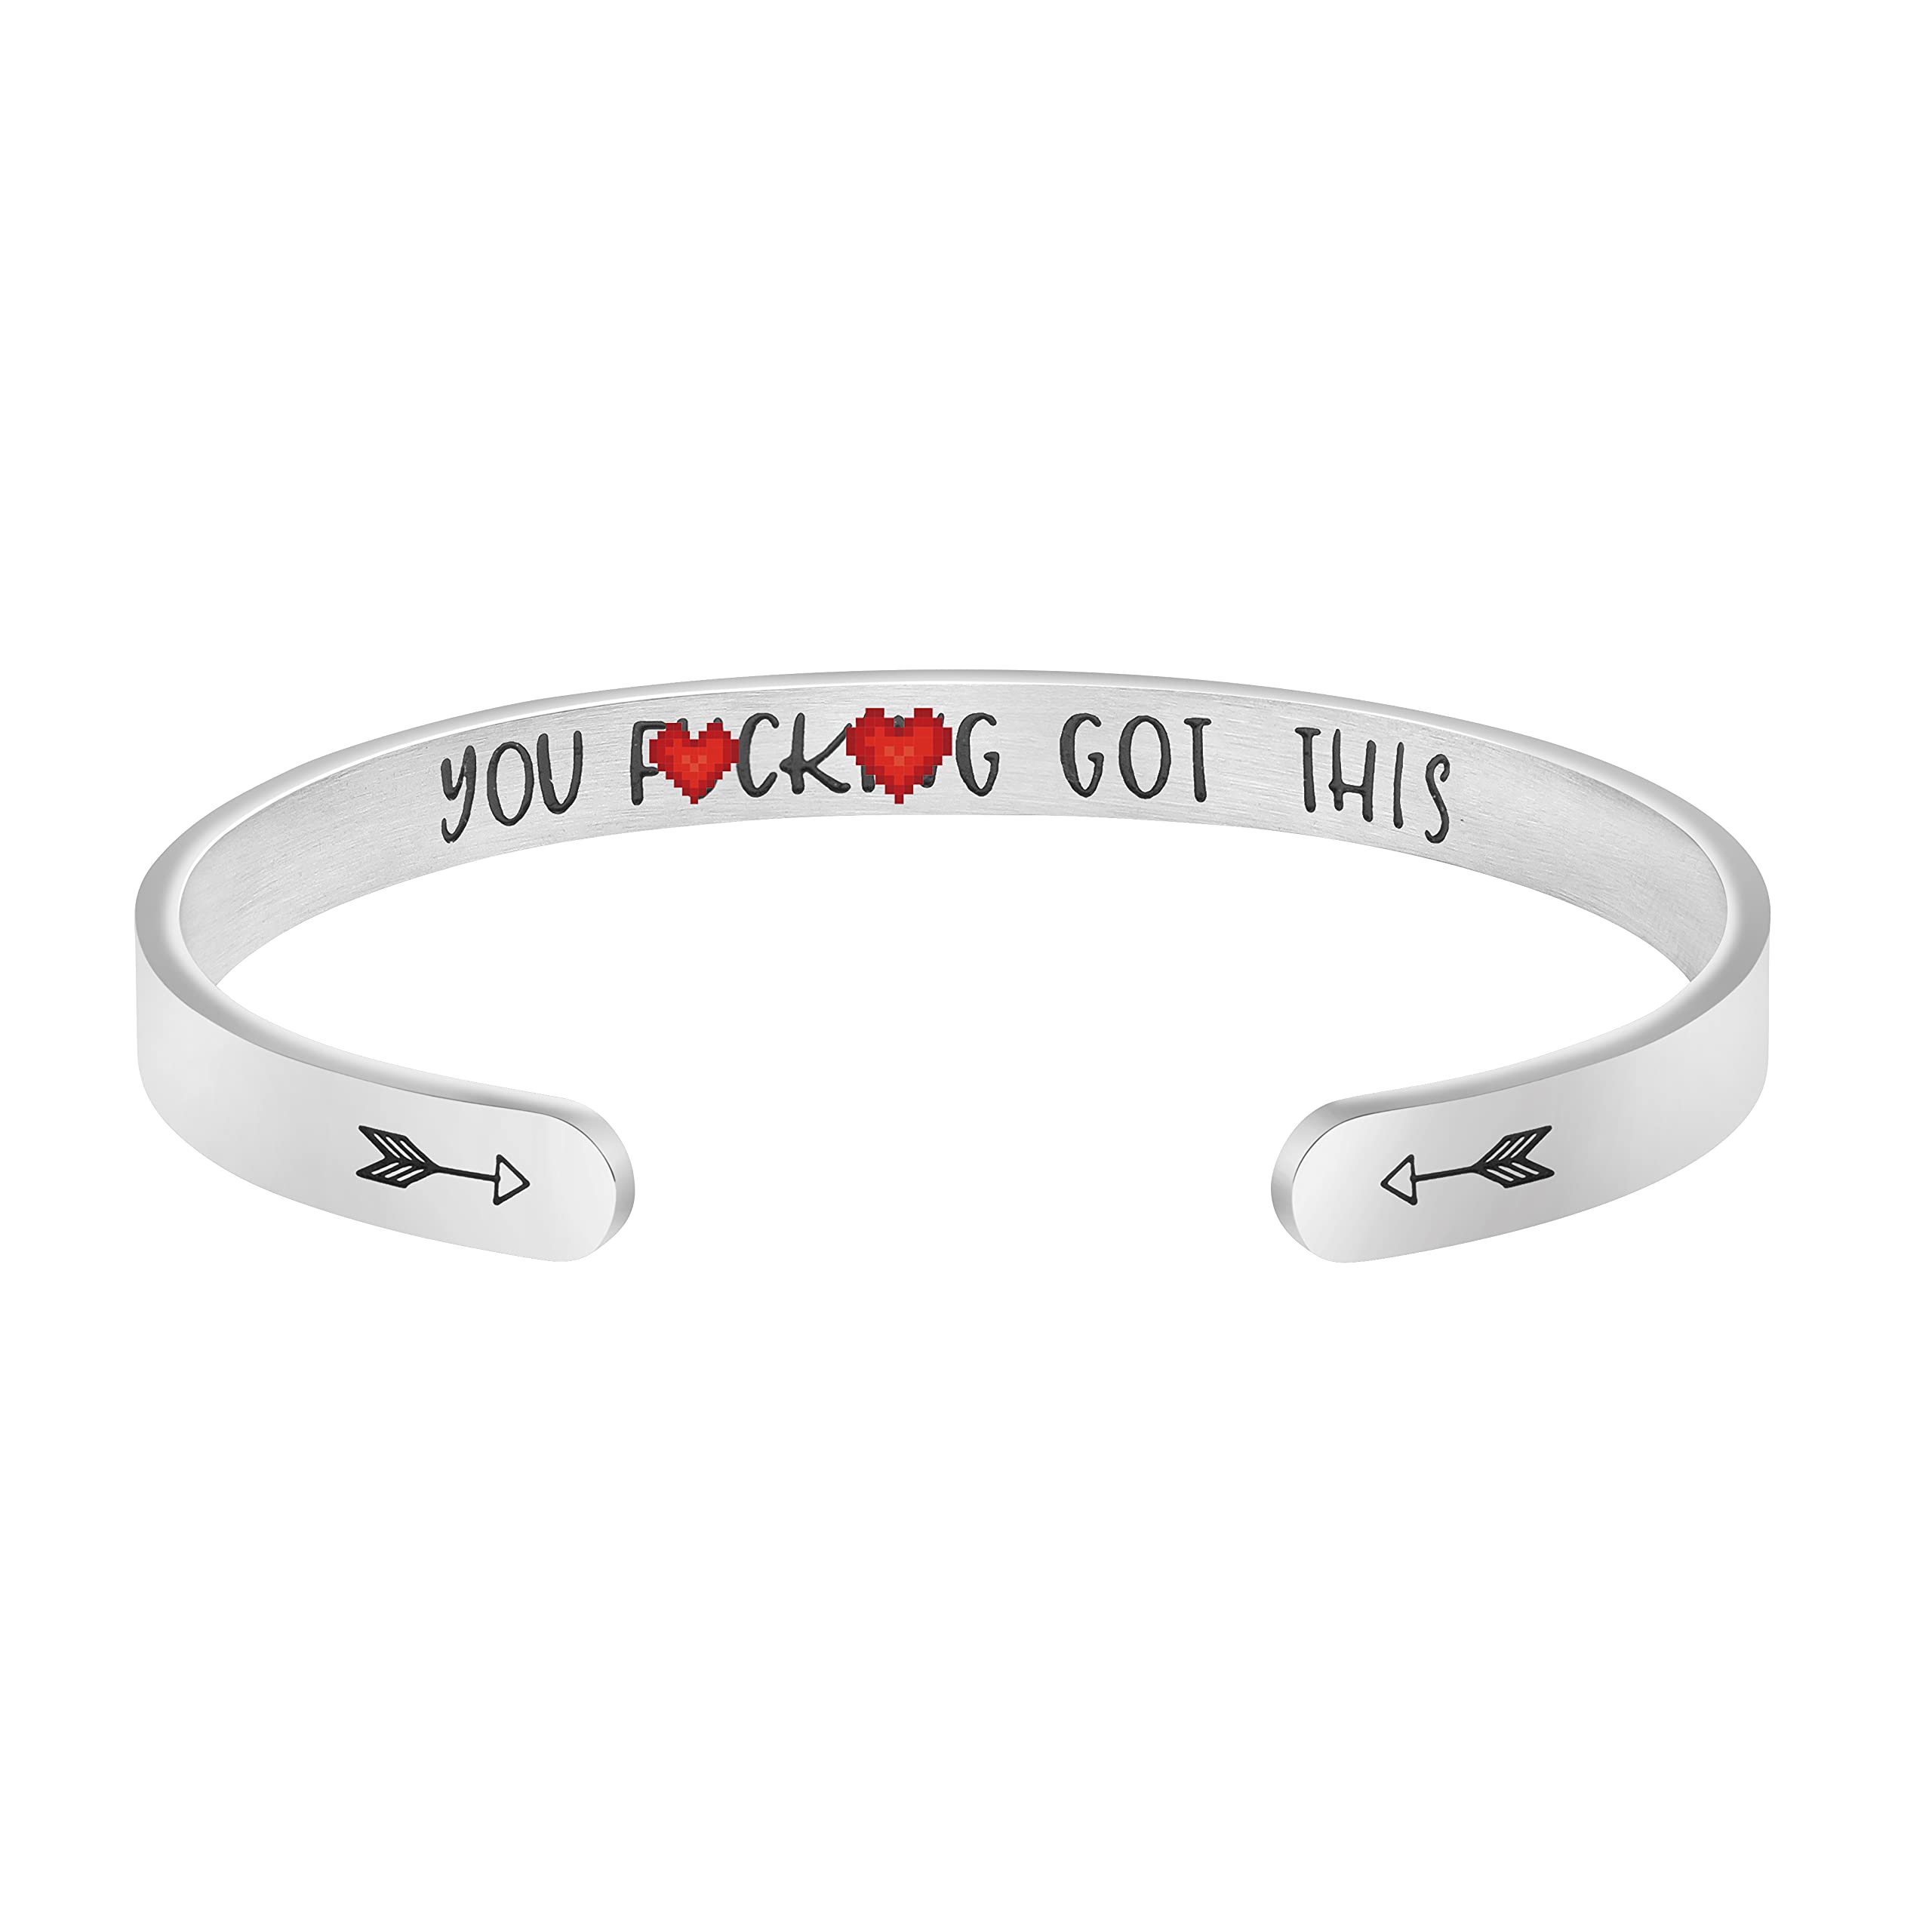 JoycuFF Bracelets for Women Personalized Inspirational Jewelry Mantra Cuff Bangle Friend Encouragement Gift for Her